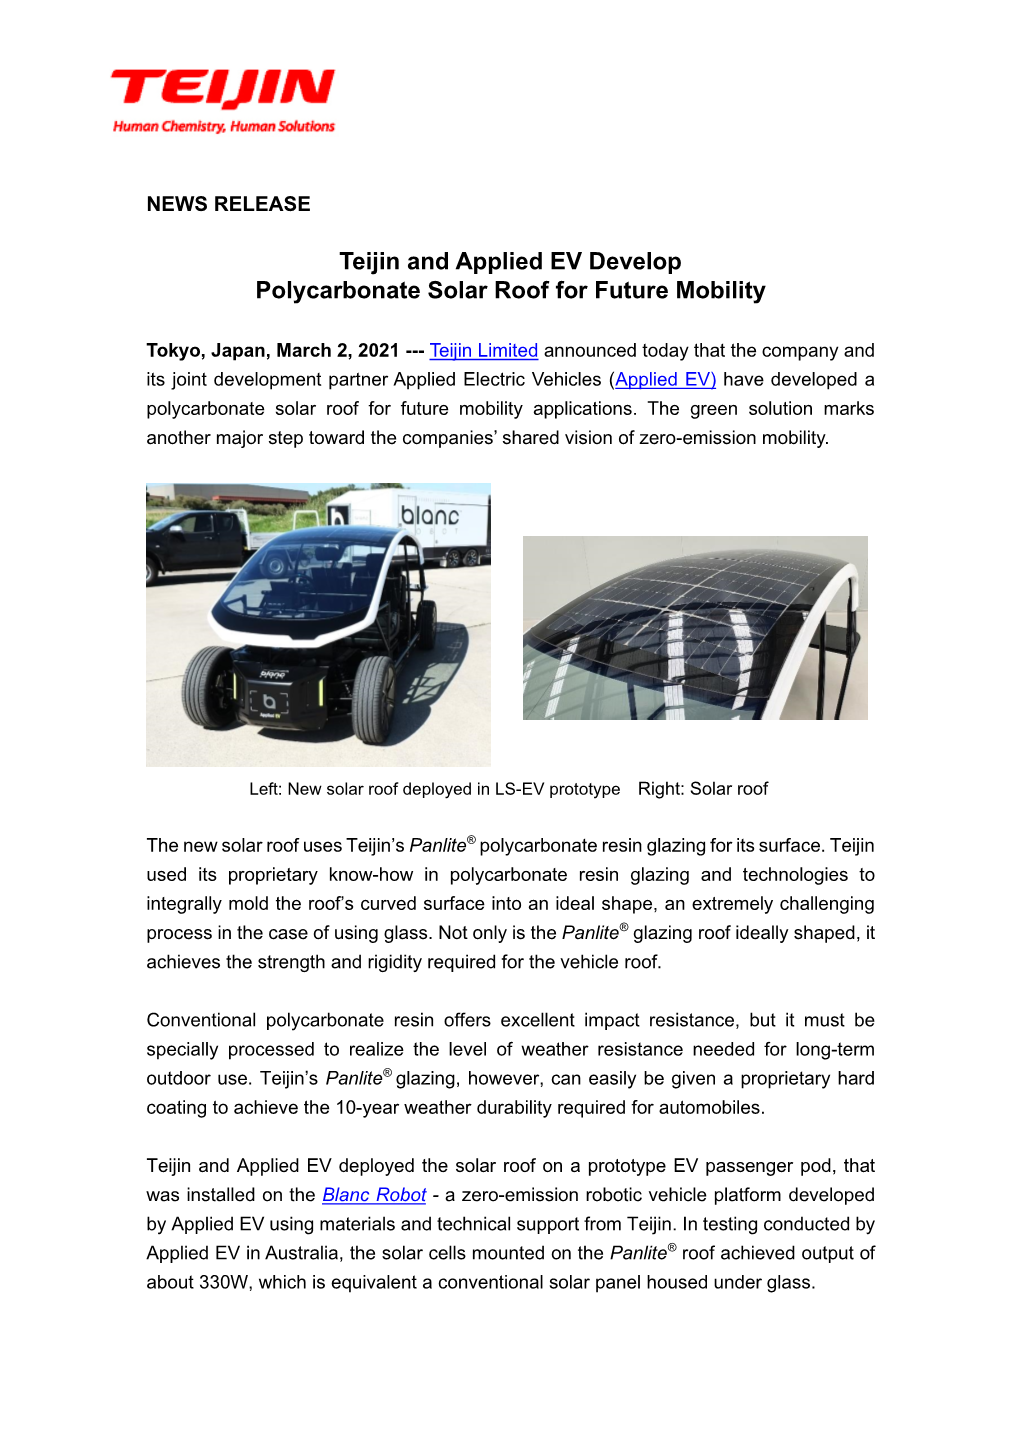 March 2, 2021Materials Teijin and Applied EV Develop Polycarbonate